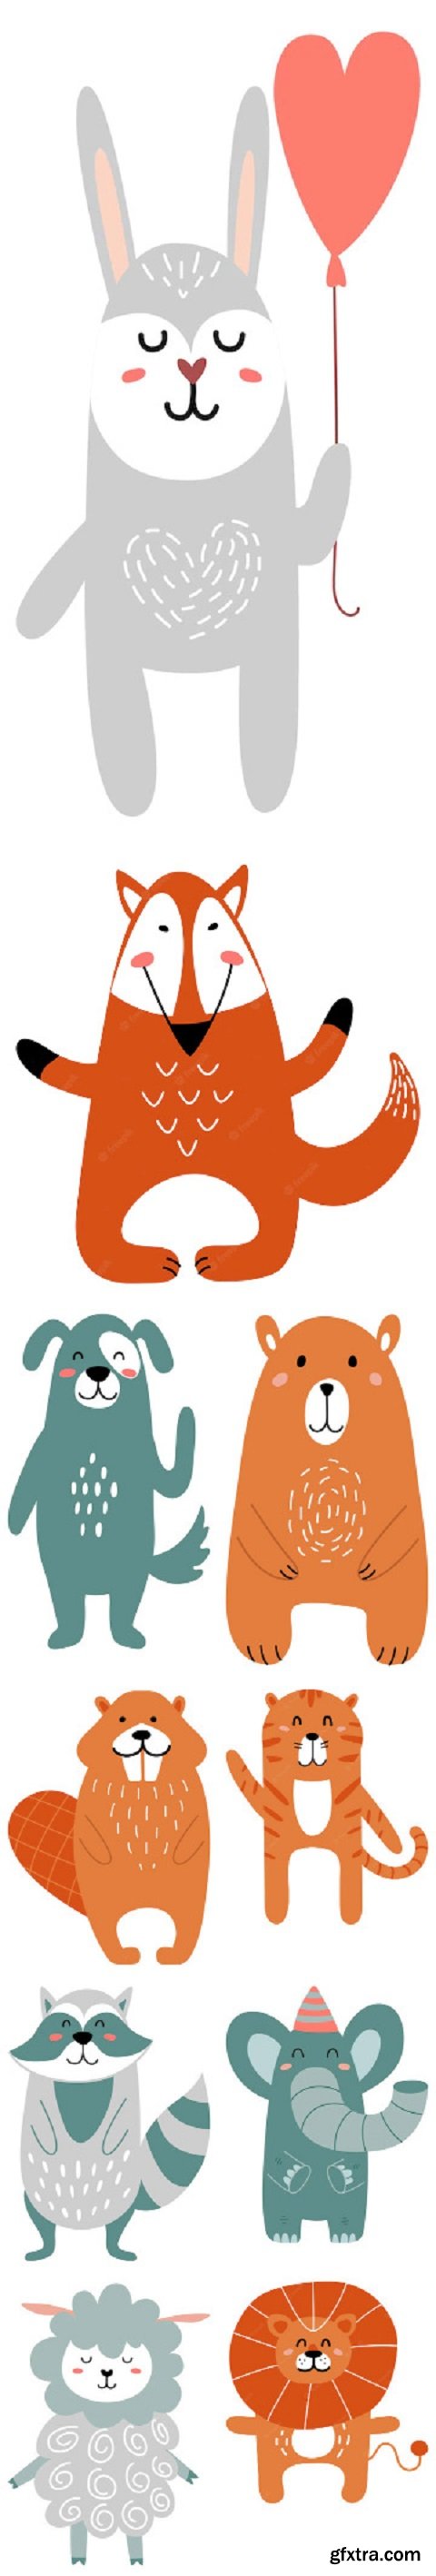 Cute animals nordic style woodland animal characters